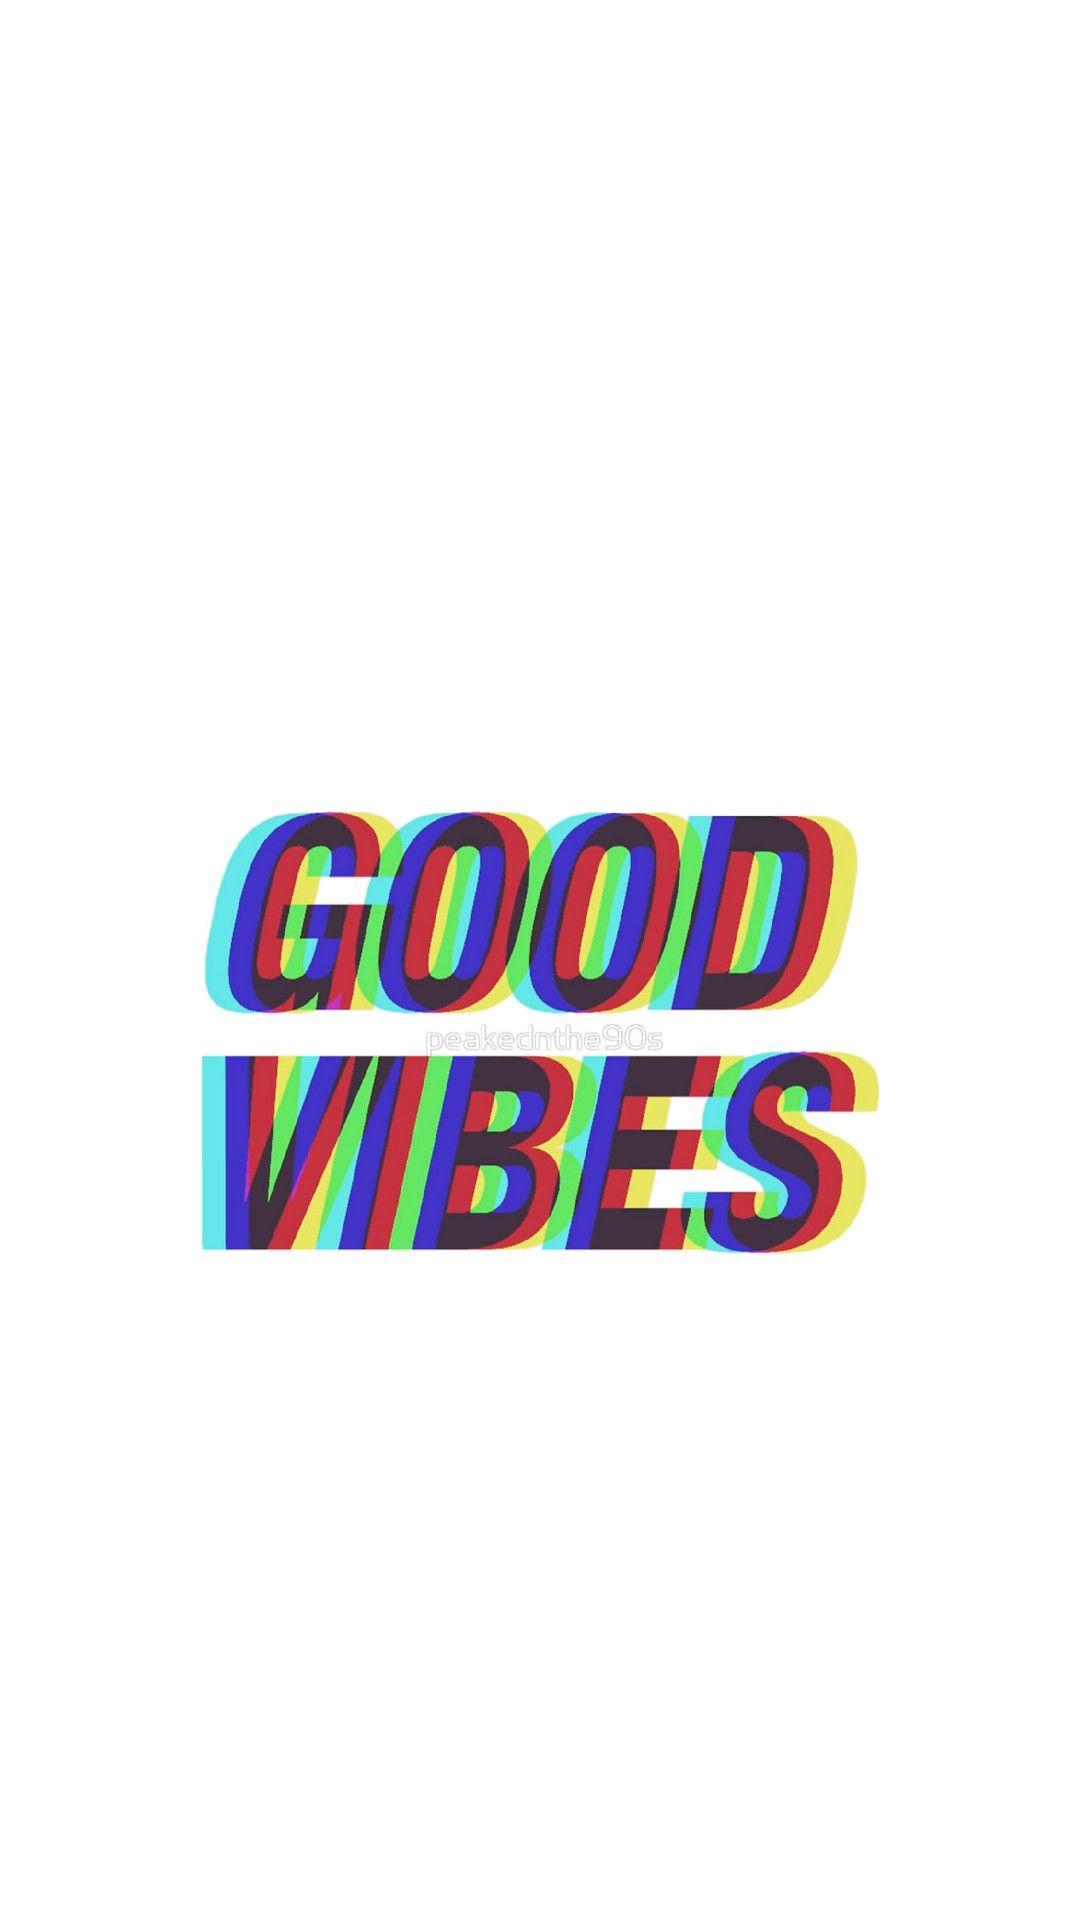 Aesthetic Vibes Wallpaper Free Aesthetic Vibes Background